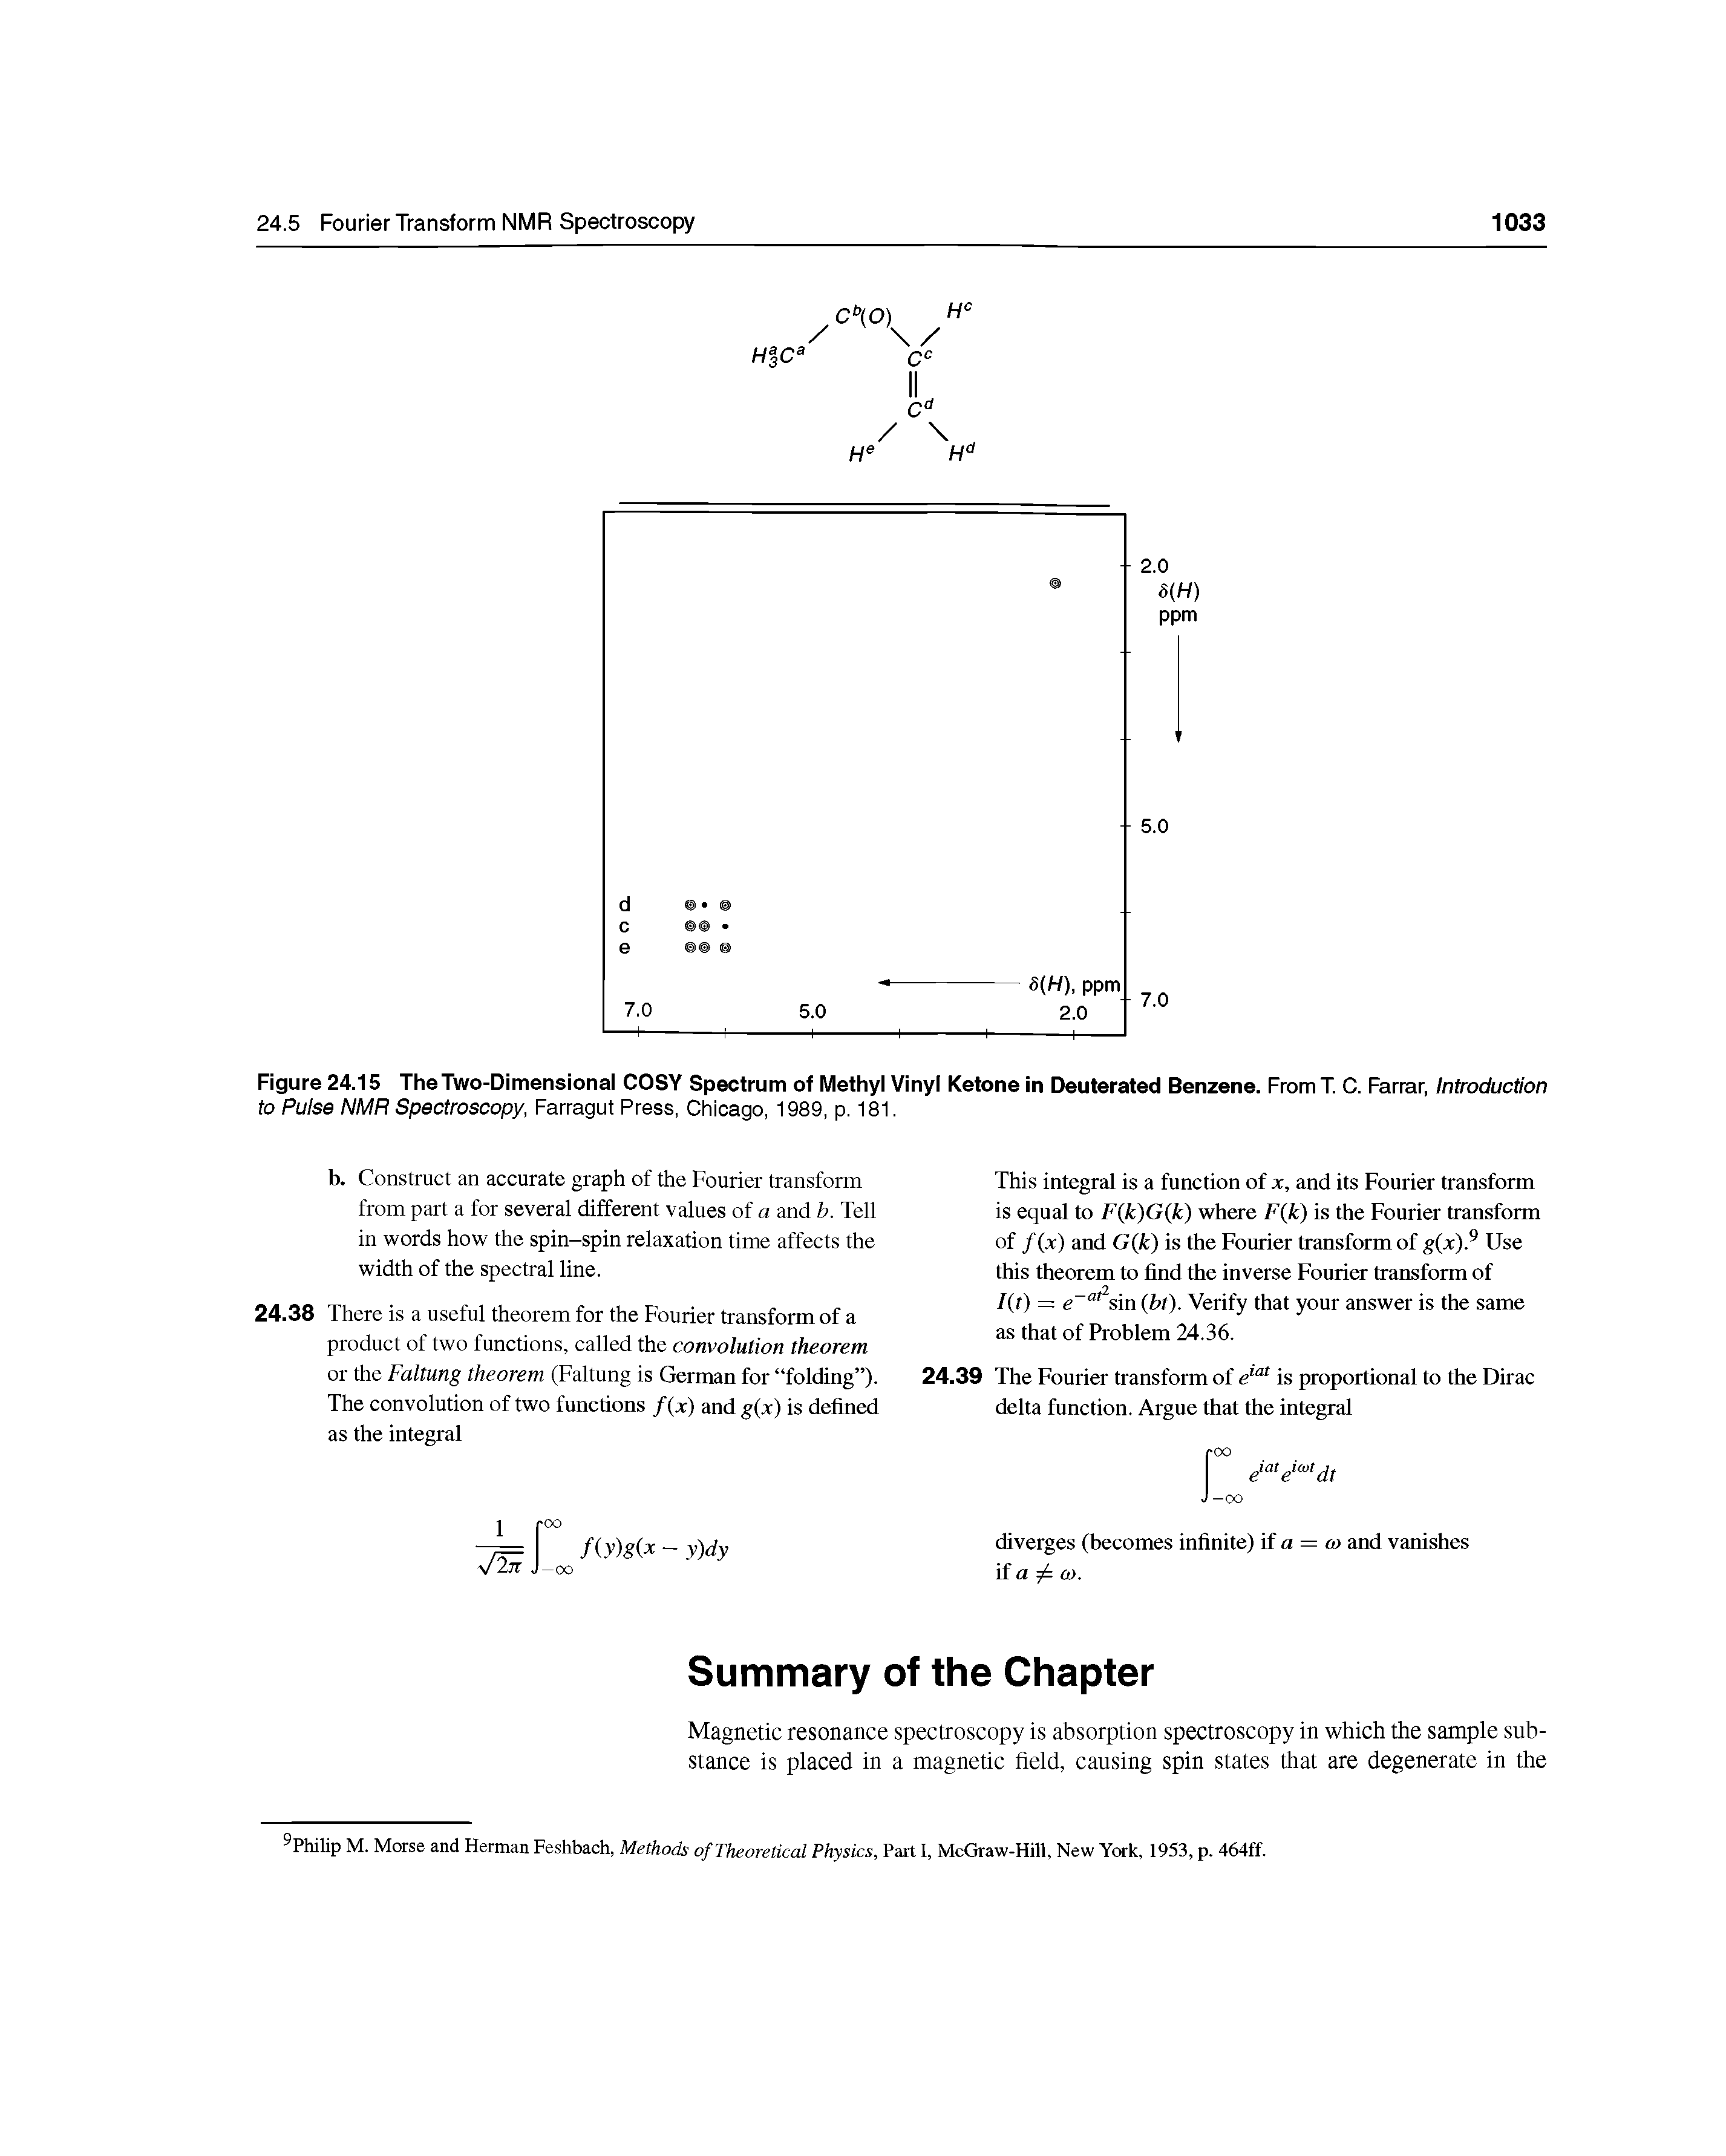 Figure 24.15 The Two-Dimensional COSY Spectrum of Methyl Vinyl Ketone in Deuterated Benzene. From T. C. Farrar, Introduction to Pulse NMR Spectroscopy, Farragut Press, Chicago, 1989, p. 181.